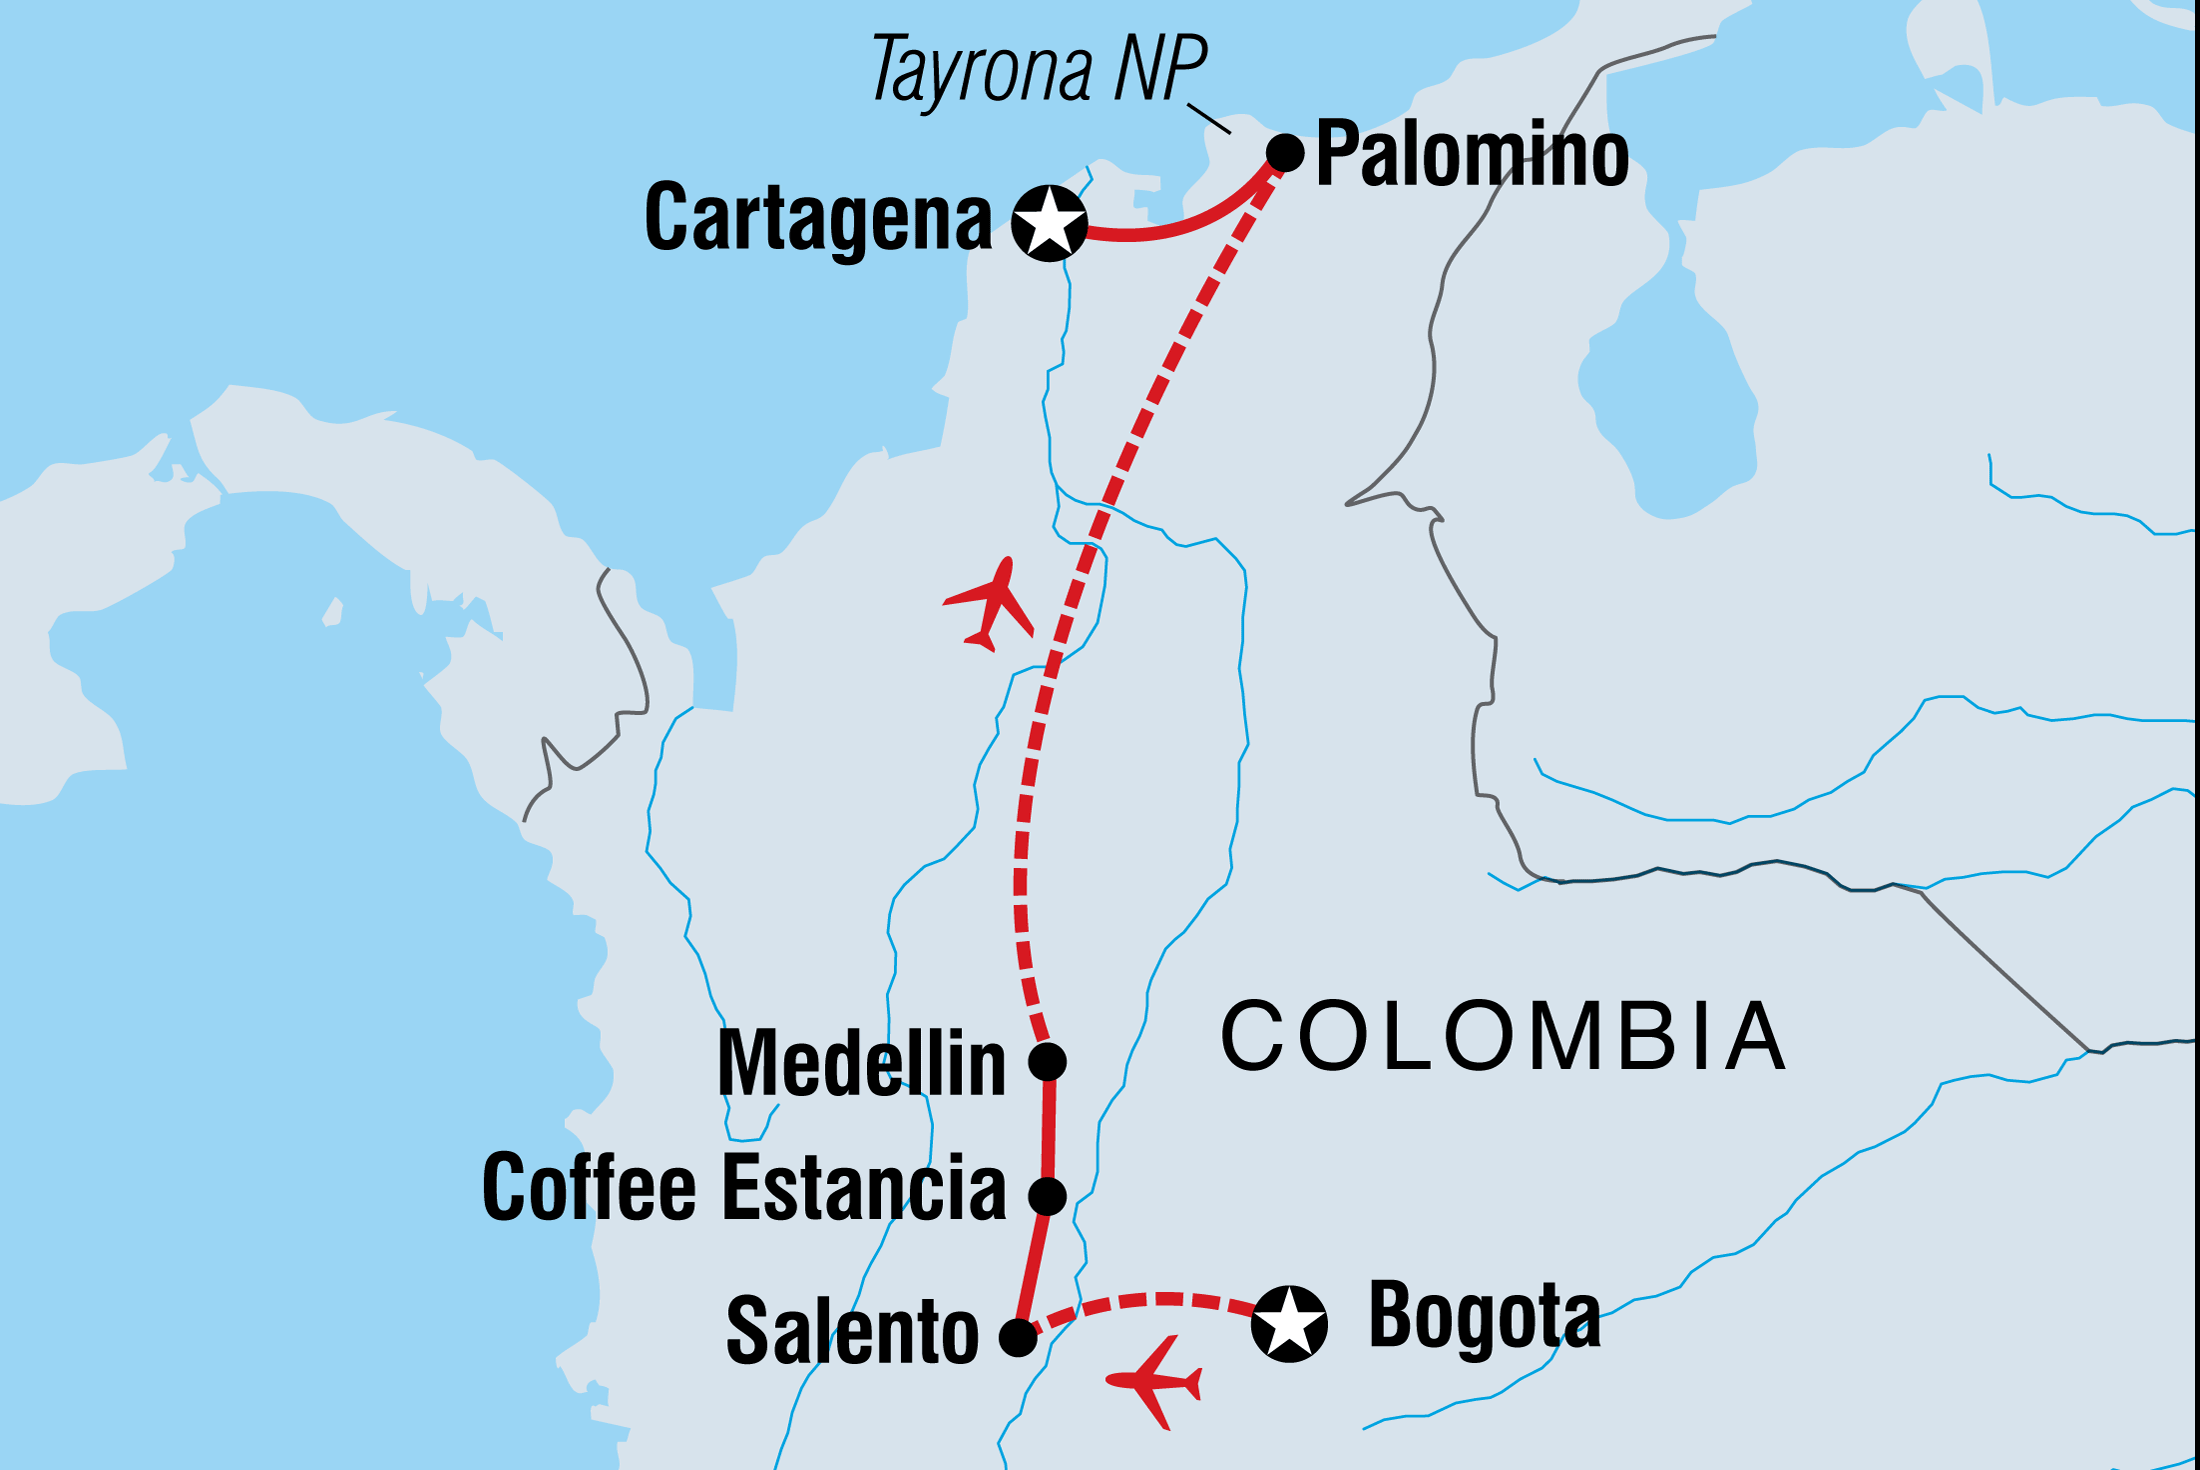 Map of Real Colombia including Colombia